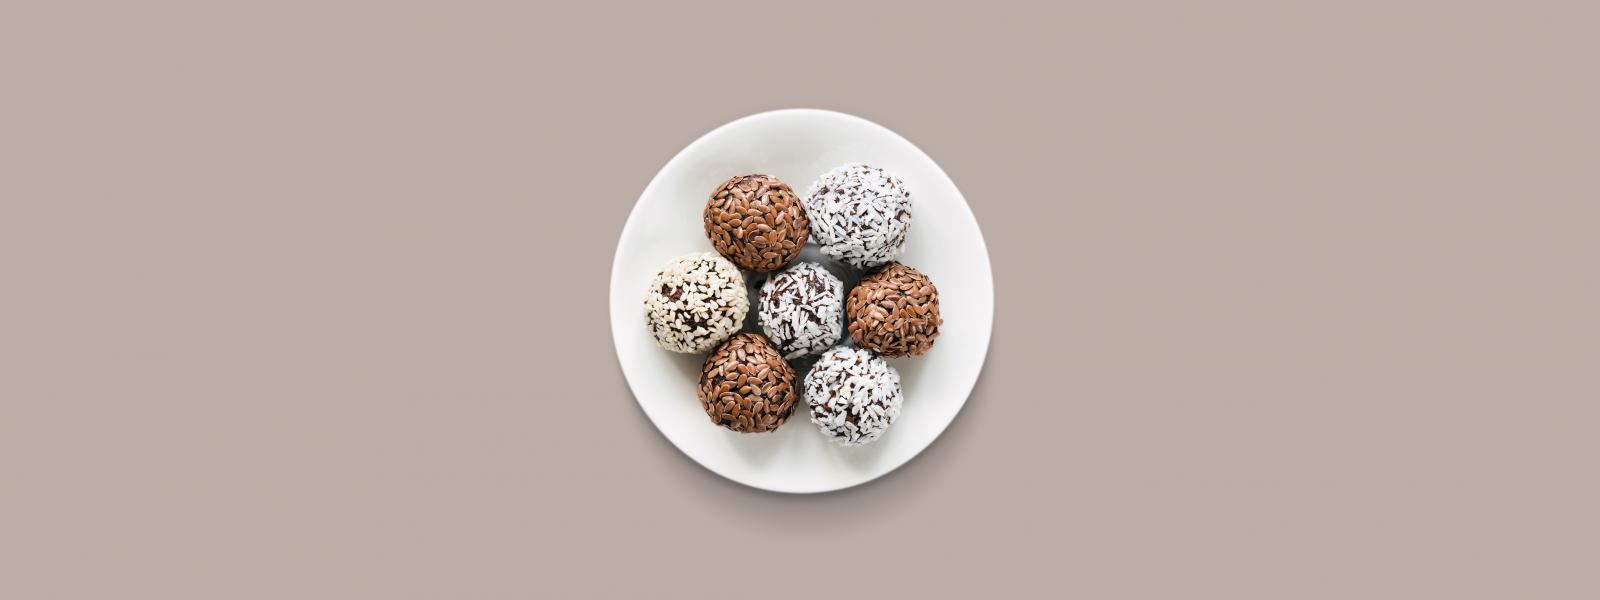 Seven protein fortified food balls on a white plate